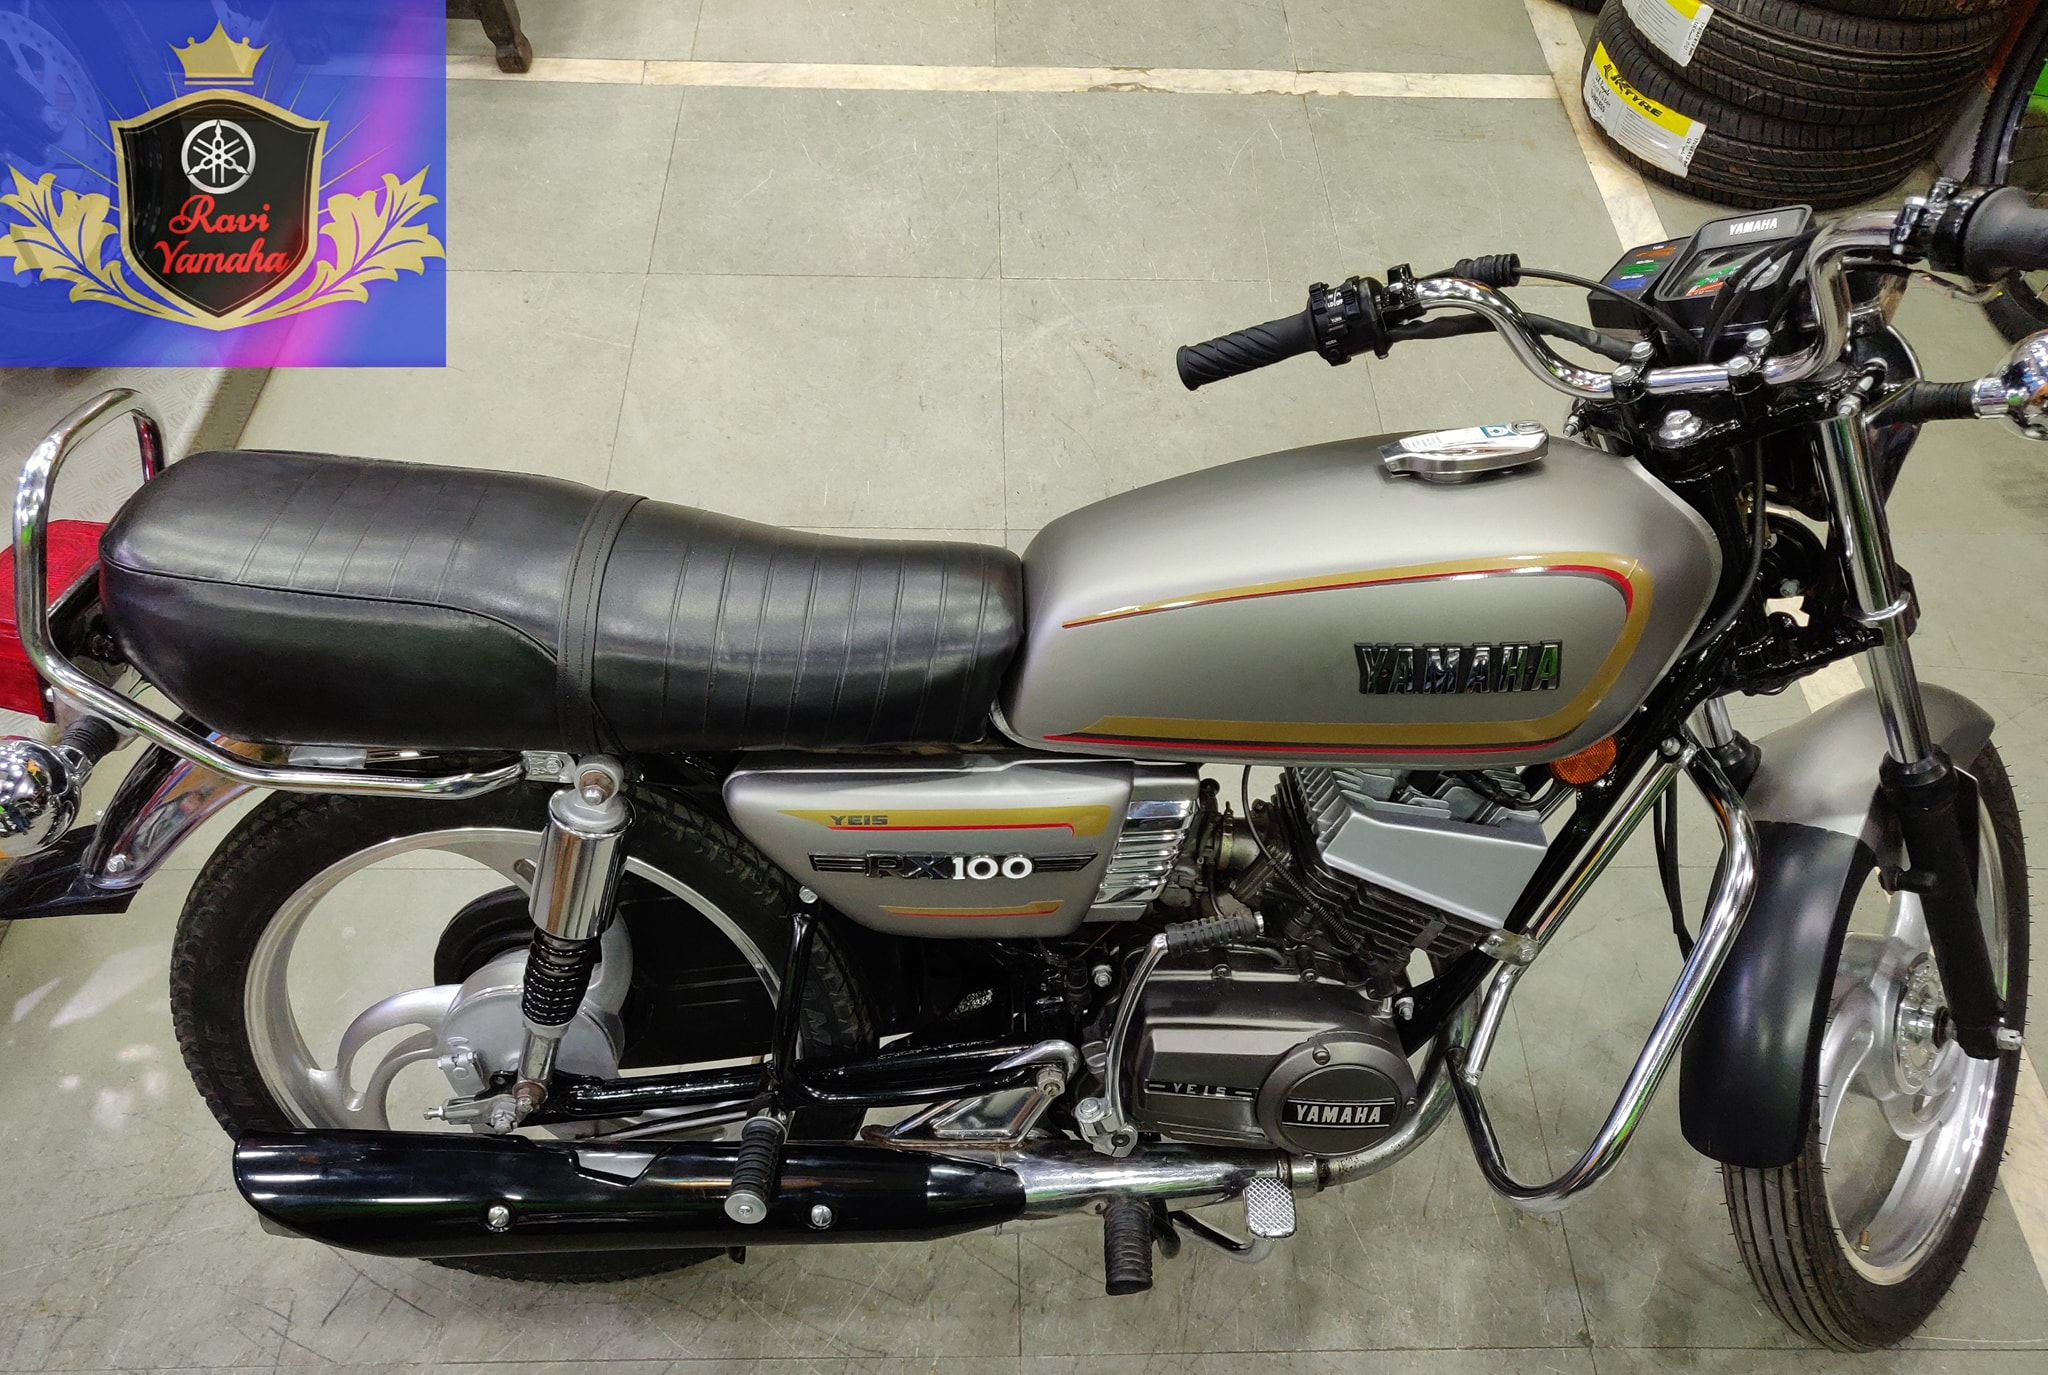 Yamaha RX 100 Restored to a Brand-New Showroom Condition Model - snap